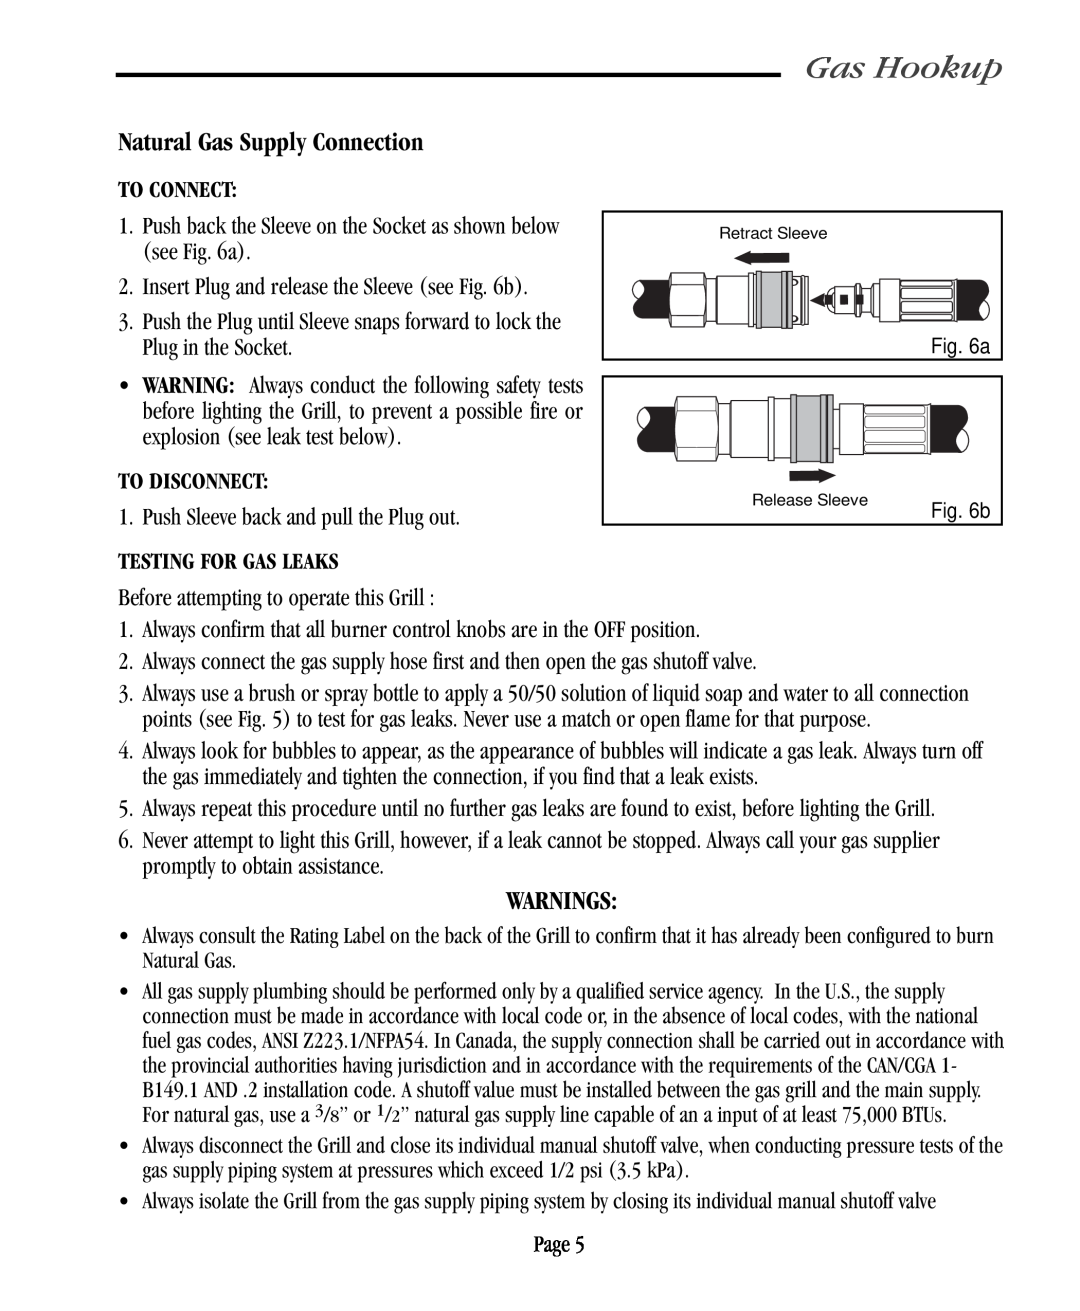 Vermont Casting VC500 user manual Natural Gas Supply Connection, Gas Hookup, Warnings, To Connect, To Disconnect, b 